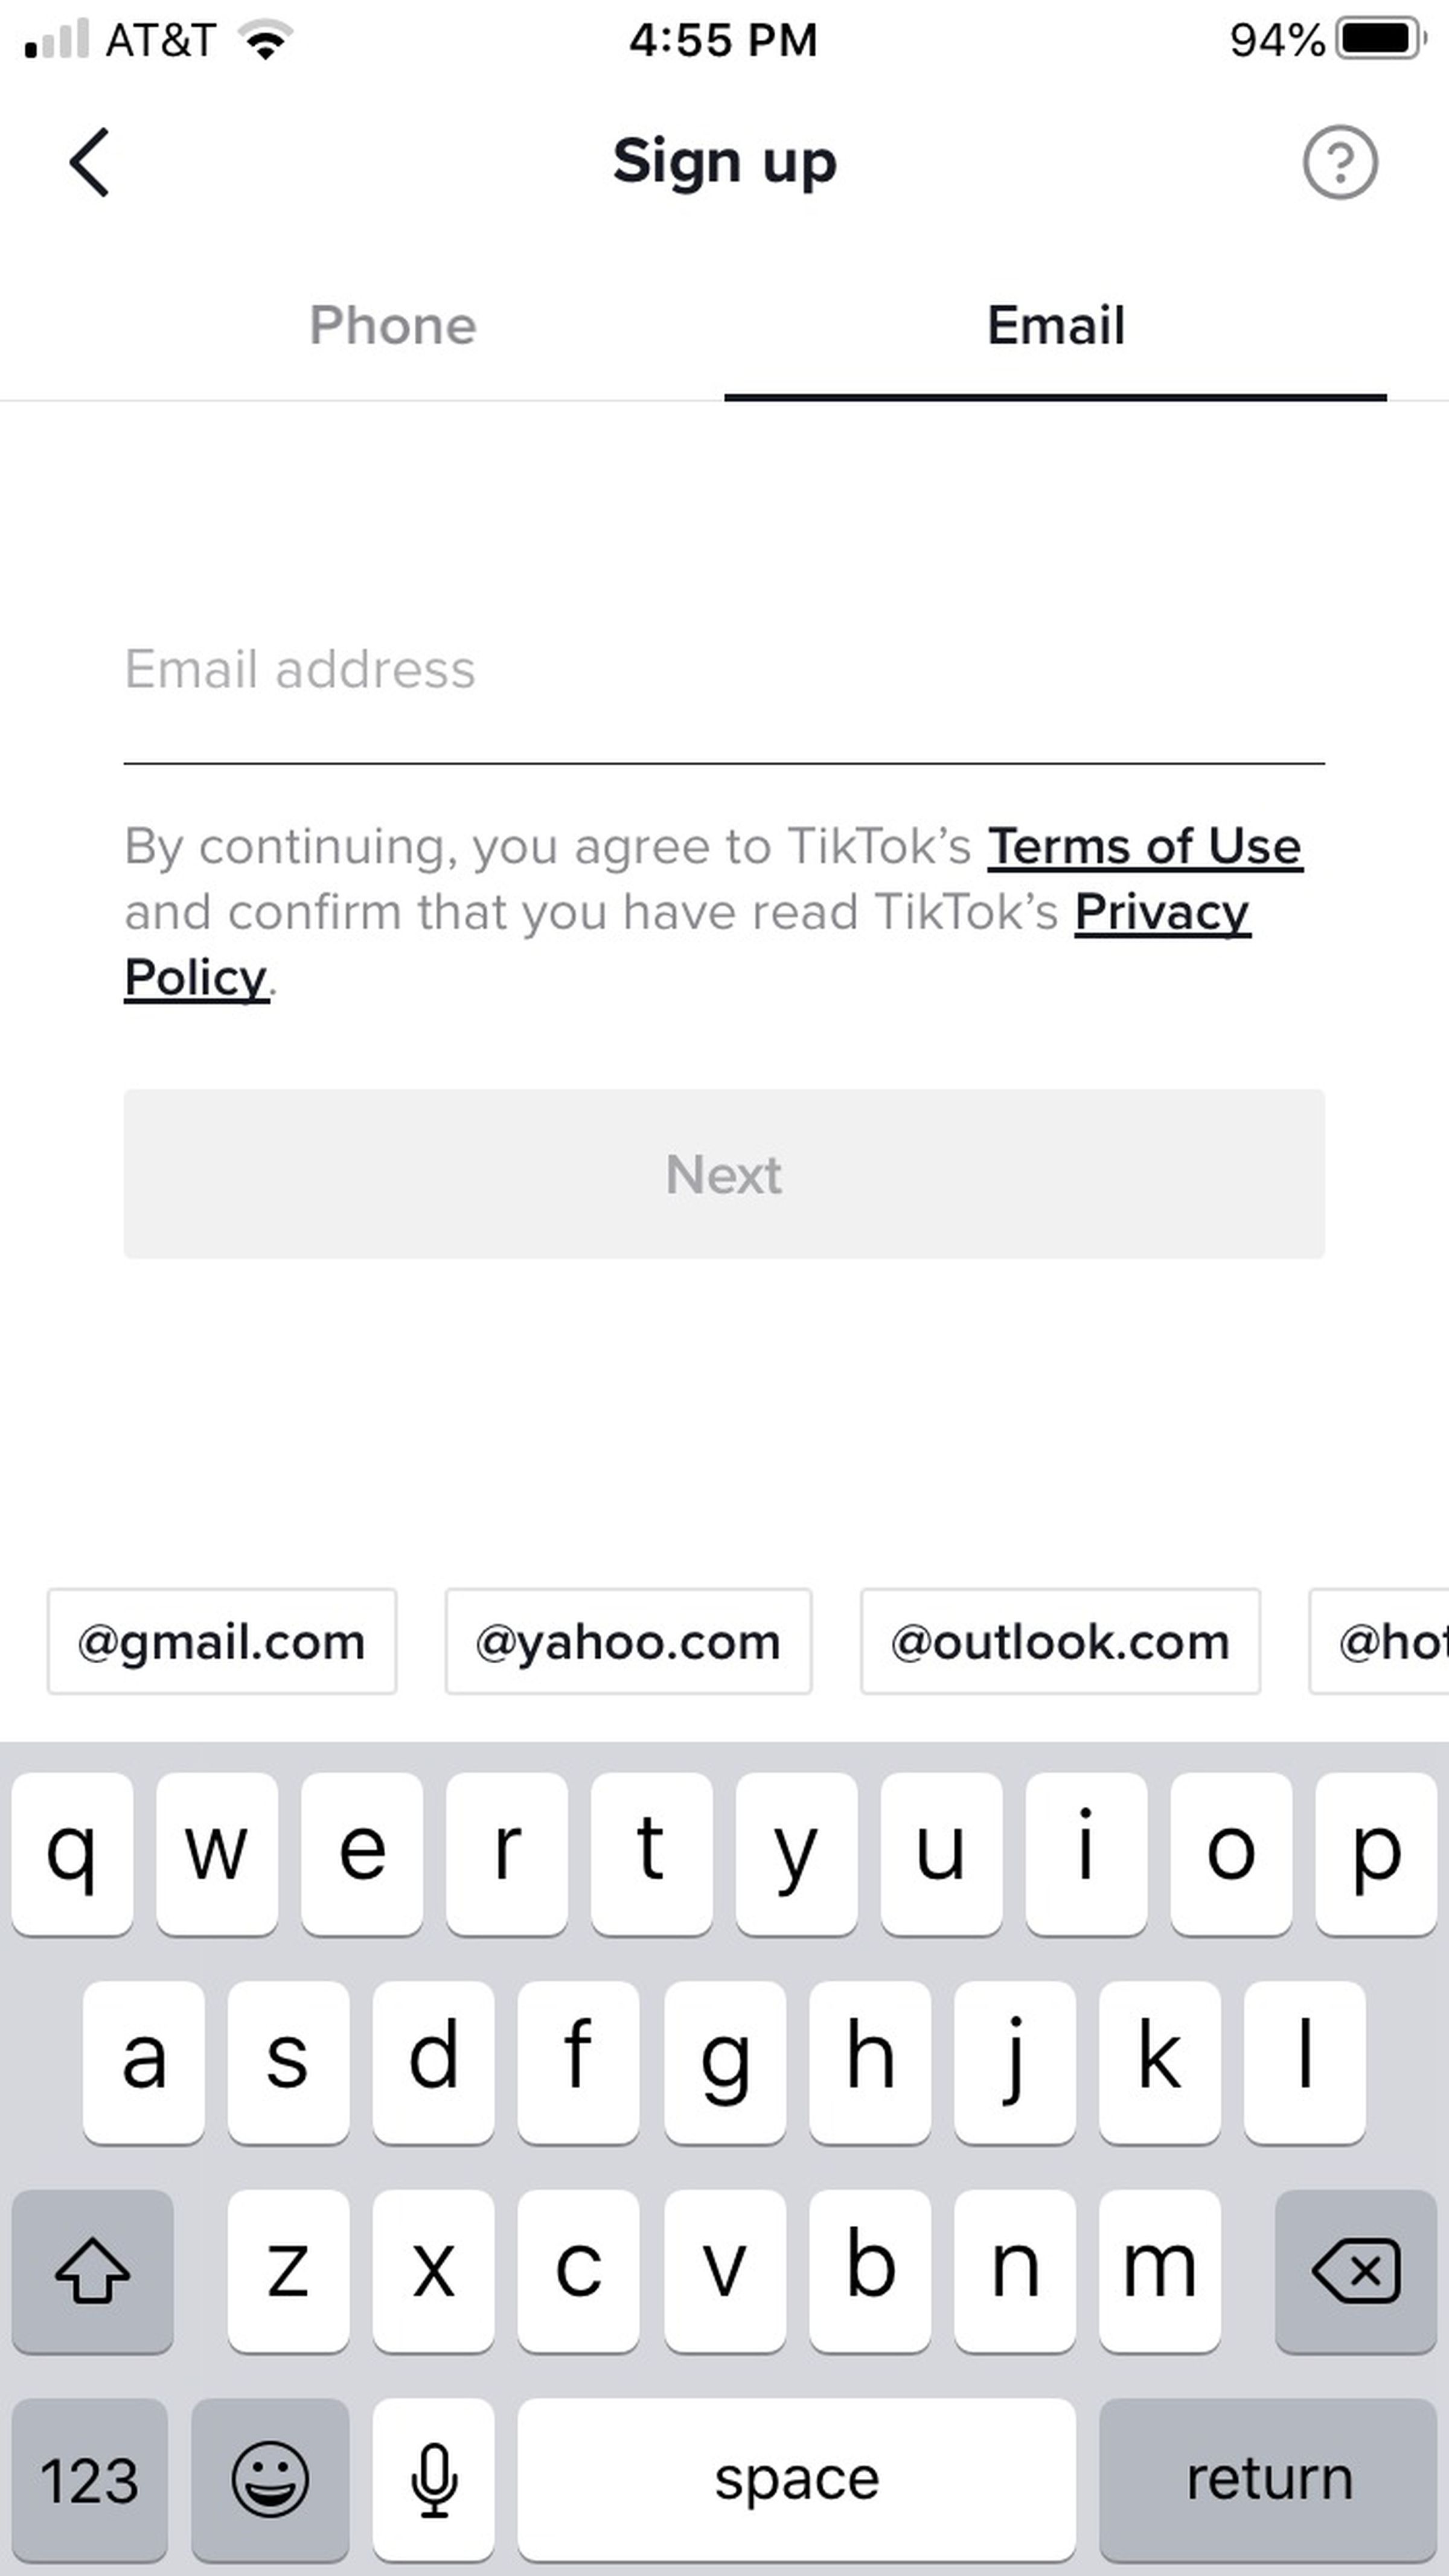 Sign up screen but with the tab for using your email address